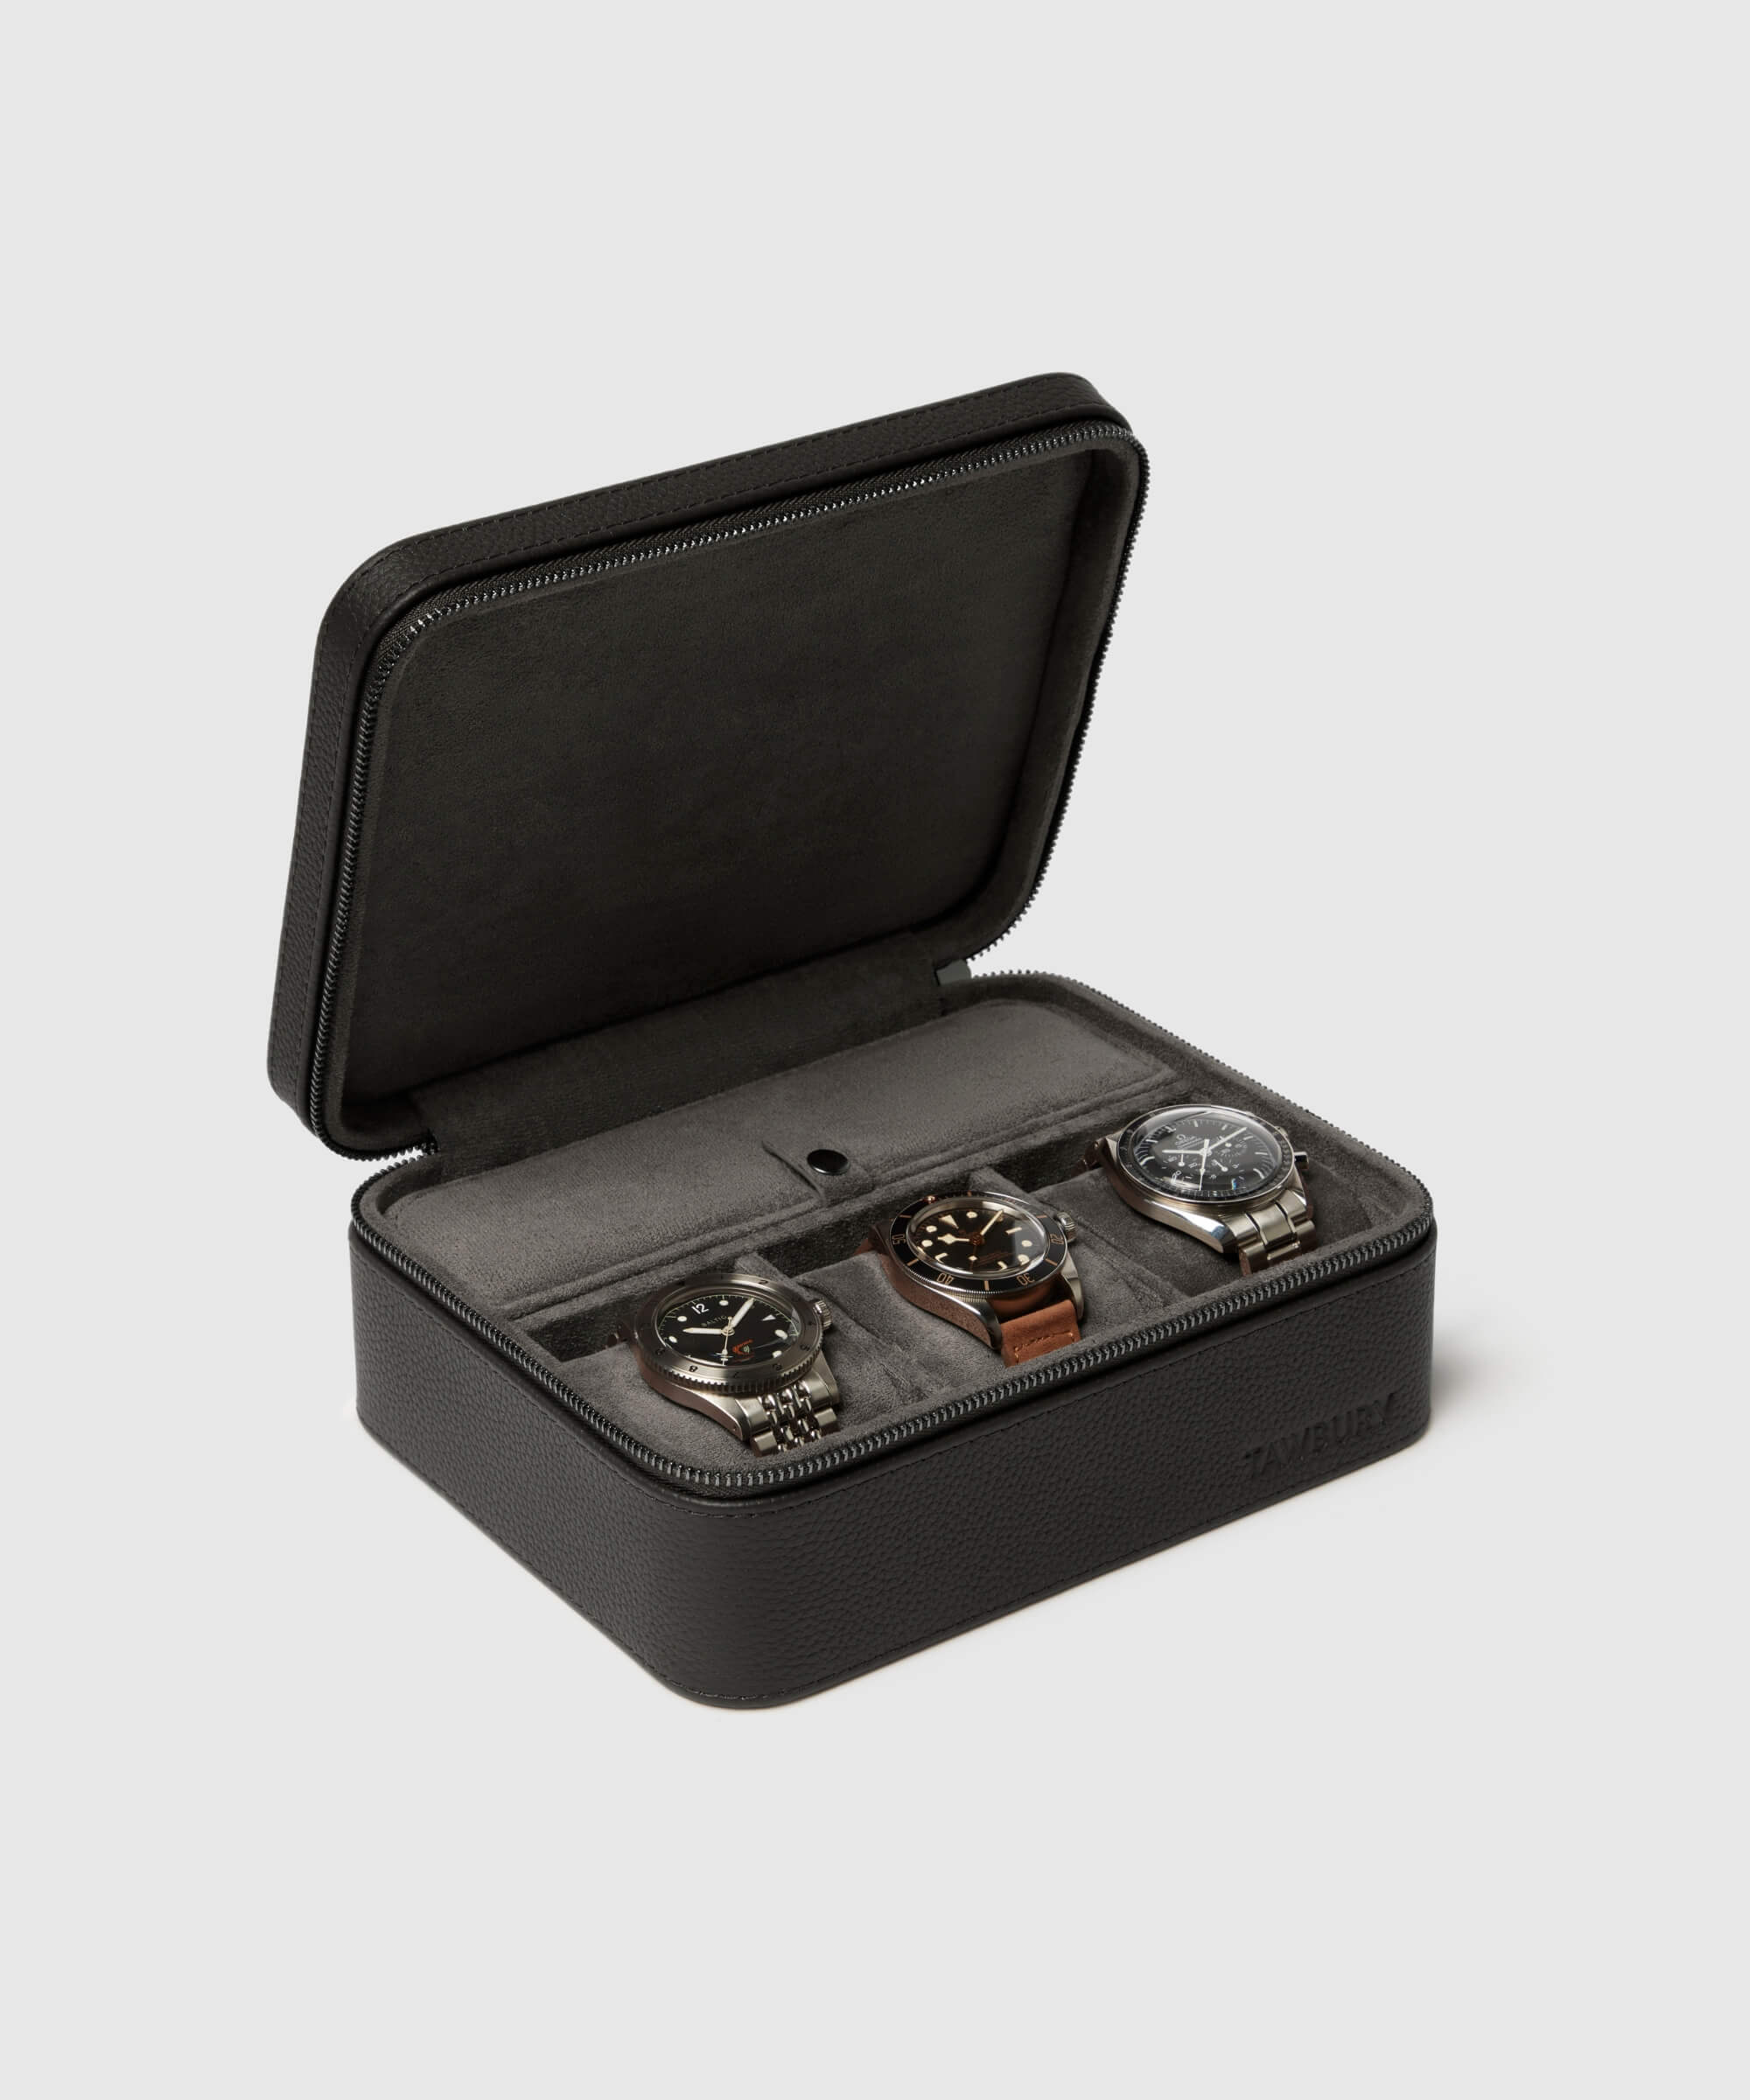 A TAWBURY Fraser 3 Watch Travel Case with Storage - Black offering protection for watch lovers, housing four black watches.